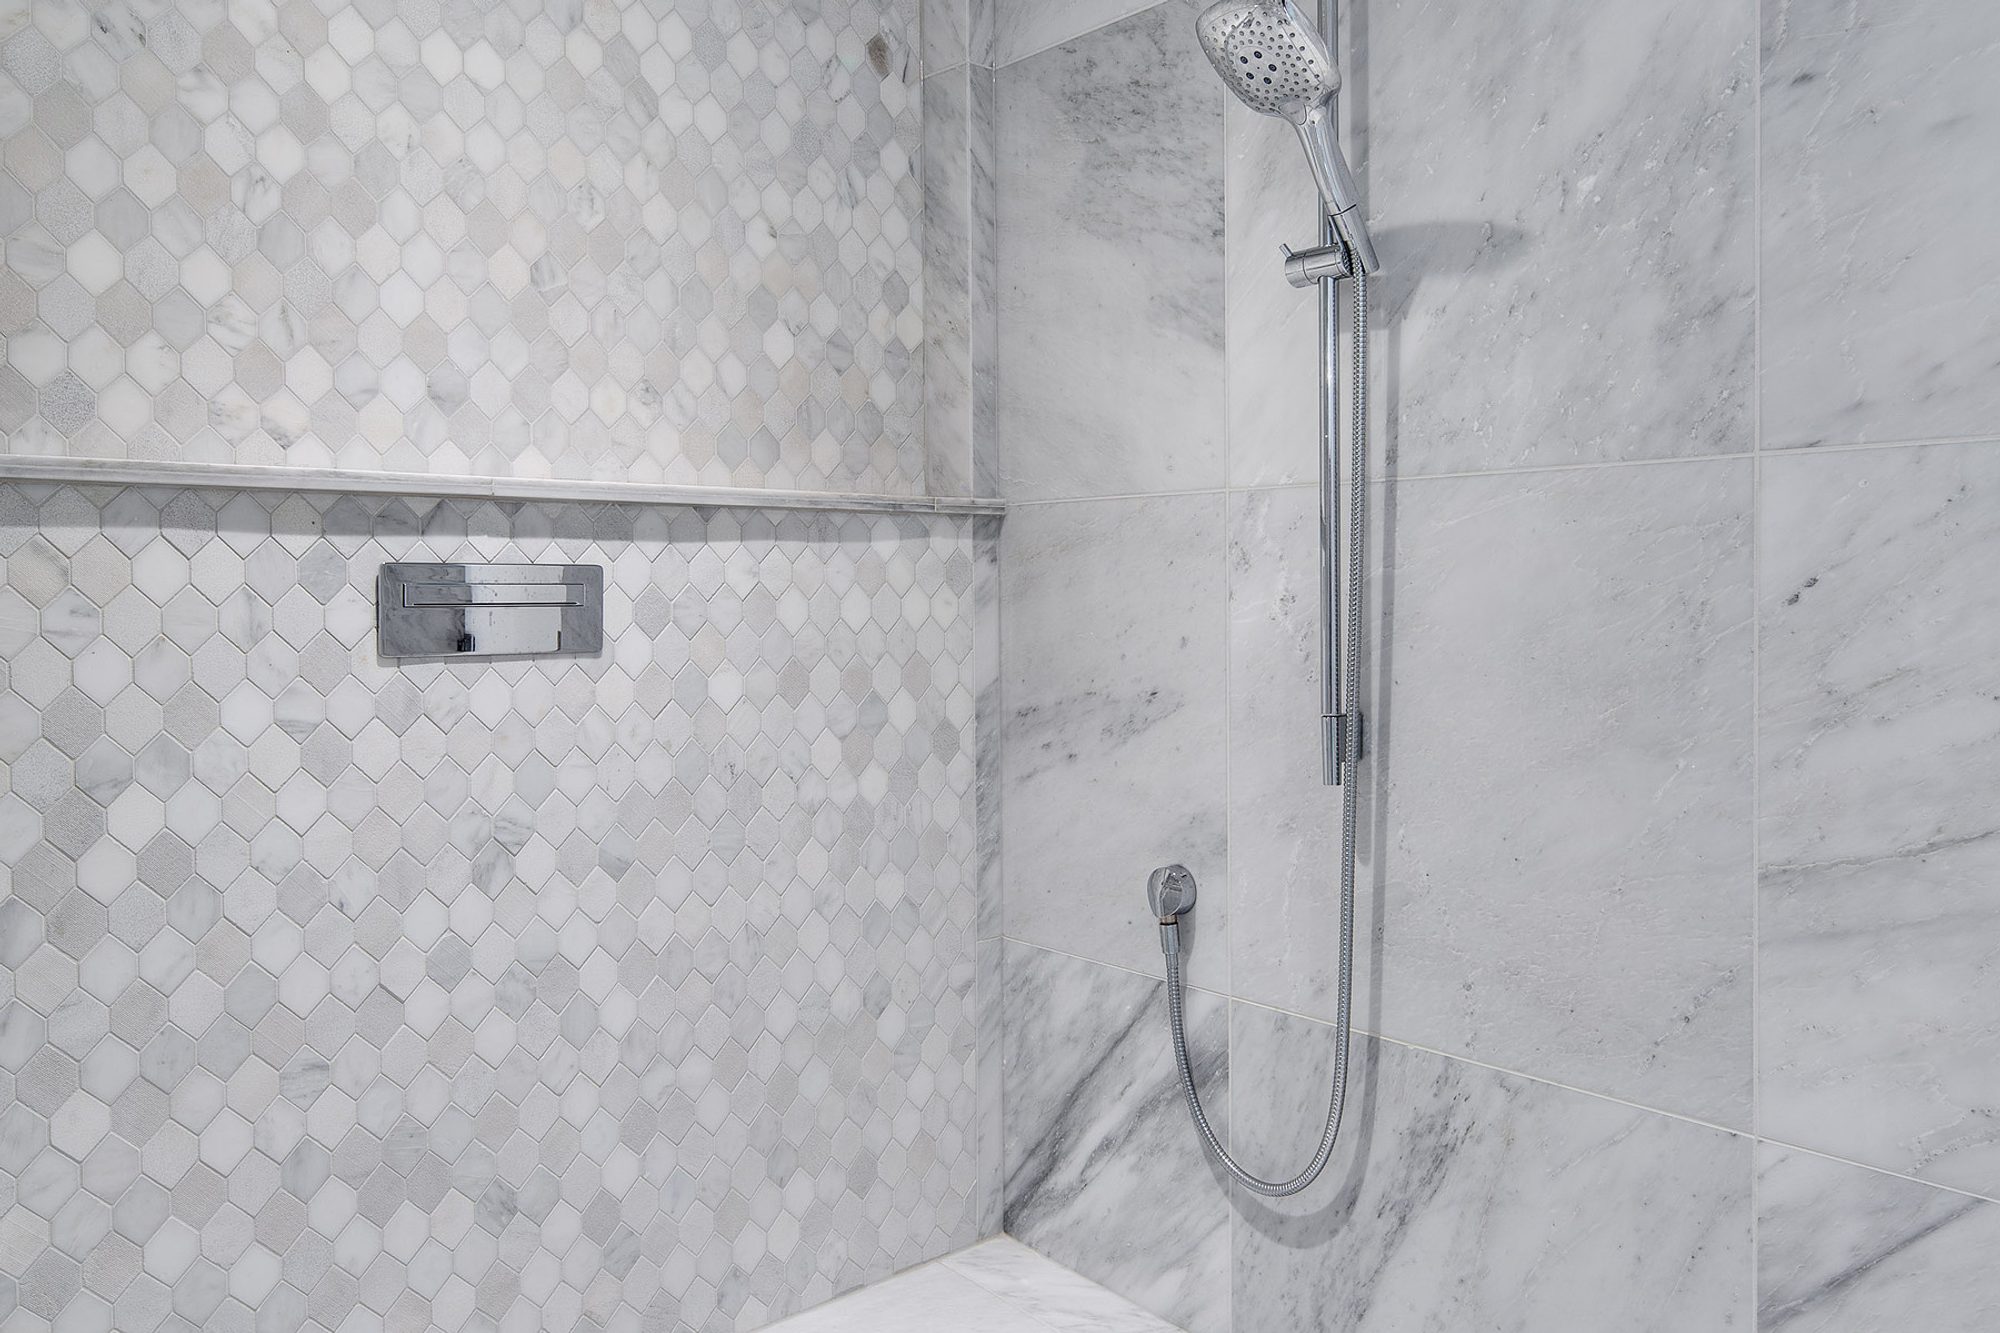 Marble tile shower with sanded white grout.